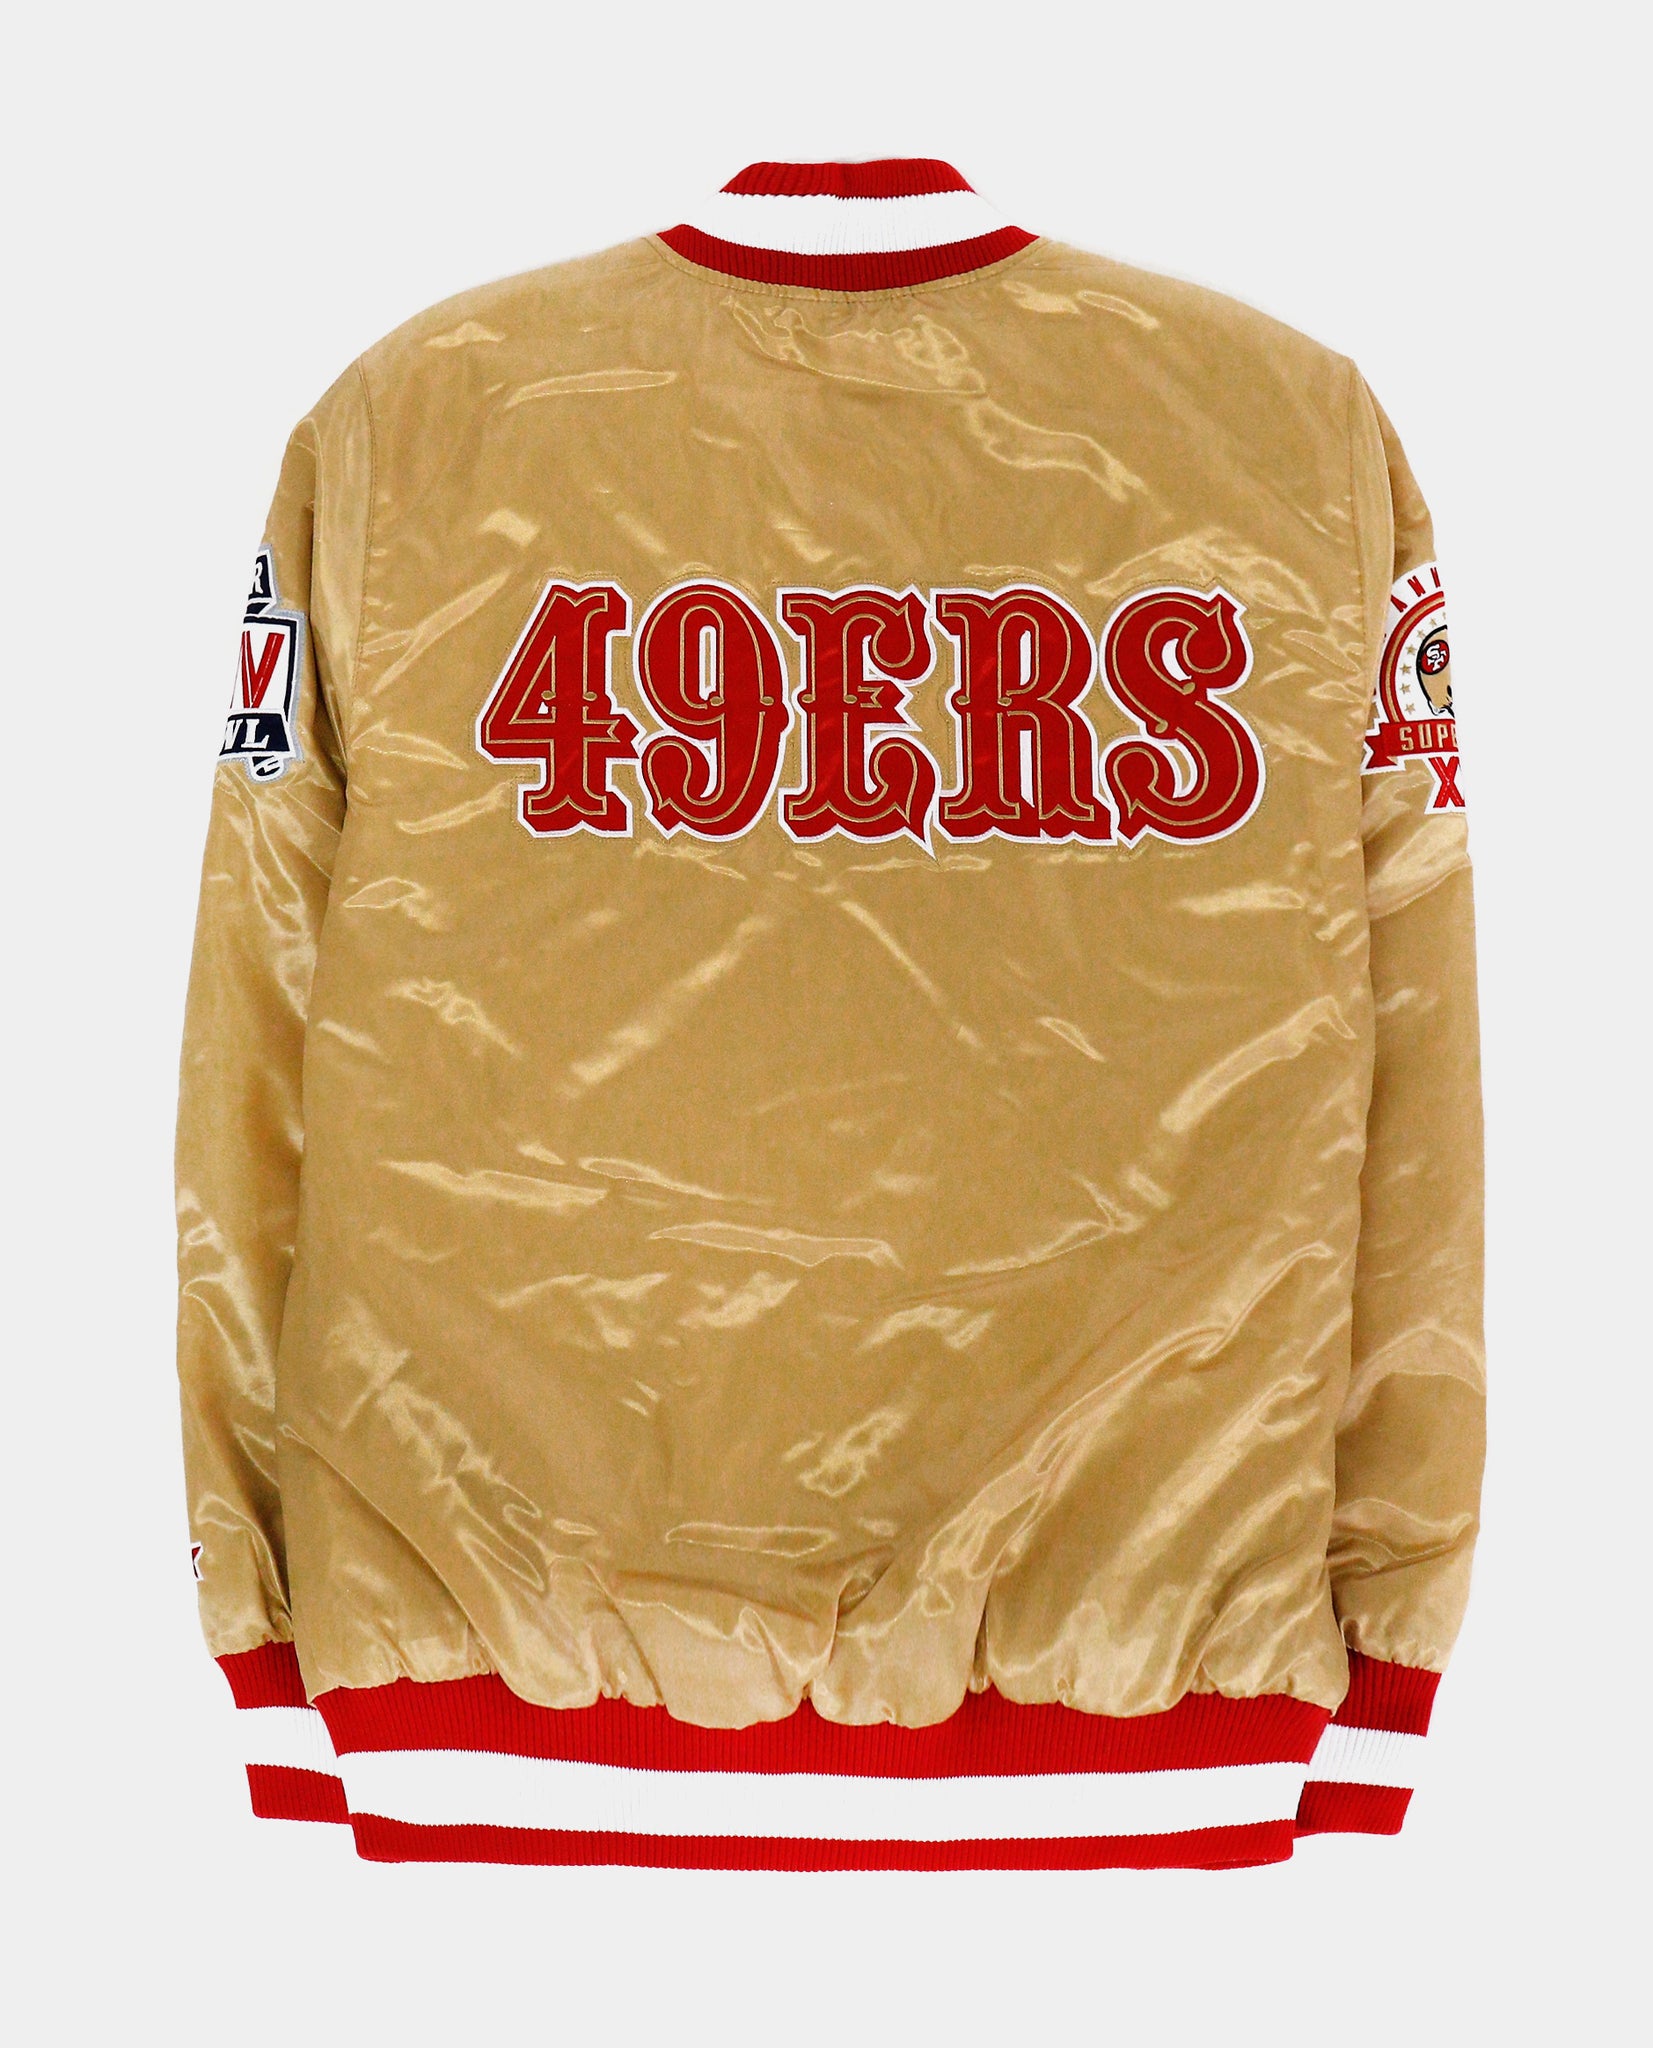 Look what came in today! Starter jackets from Shoe Palace : r/49ers